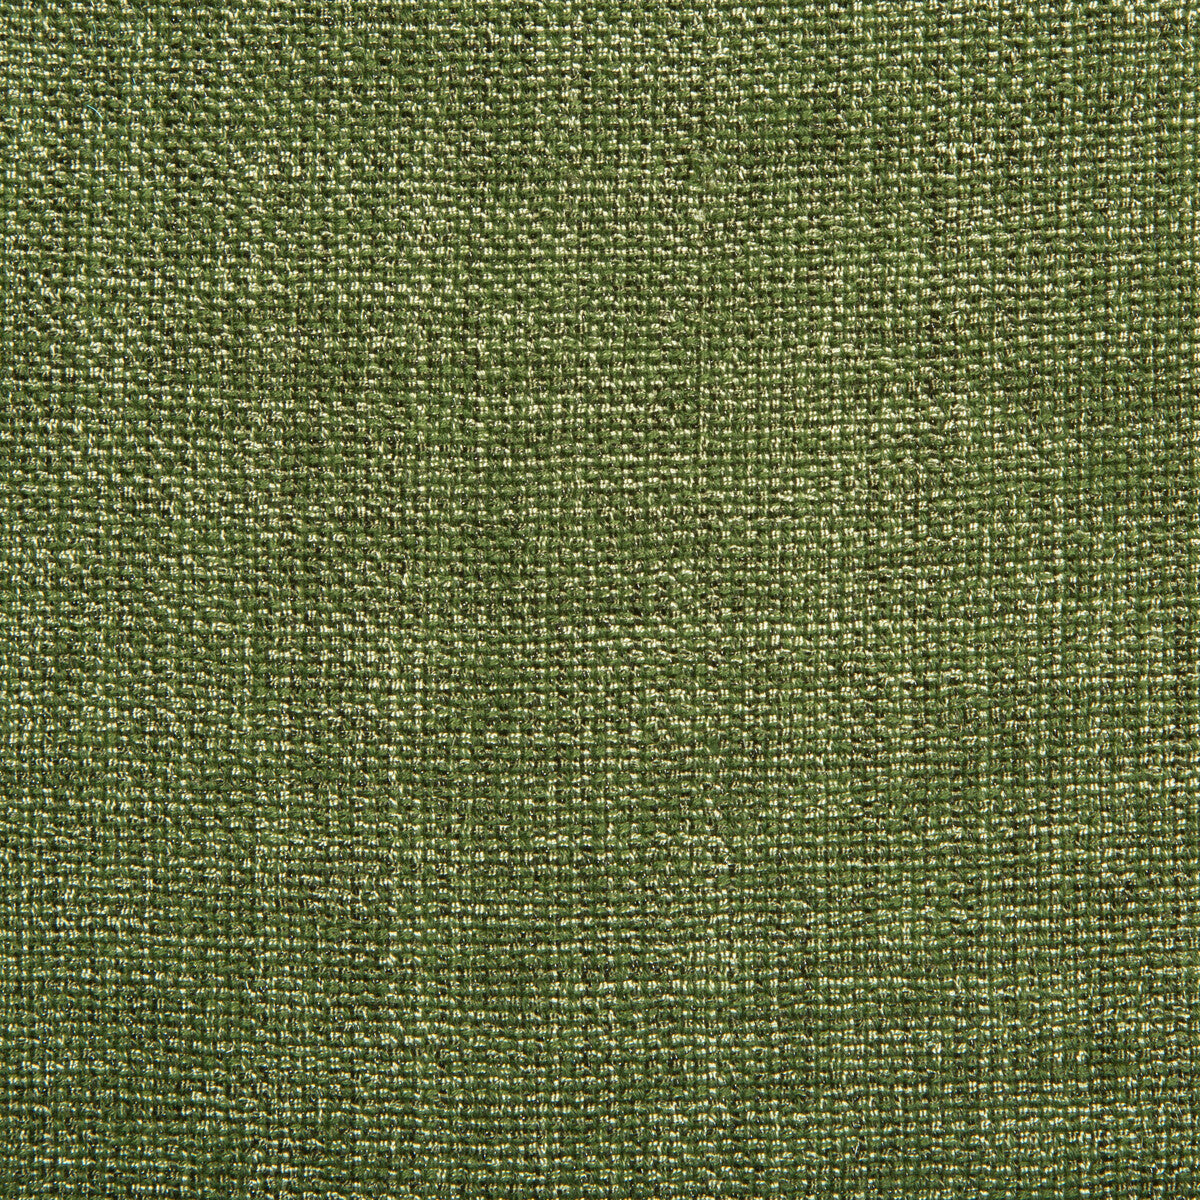 Kravet Contract fabric in 34926-303 color - pattern 34926.303.0 - by Kravet Contract